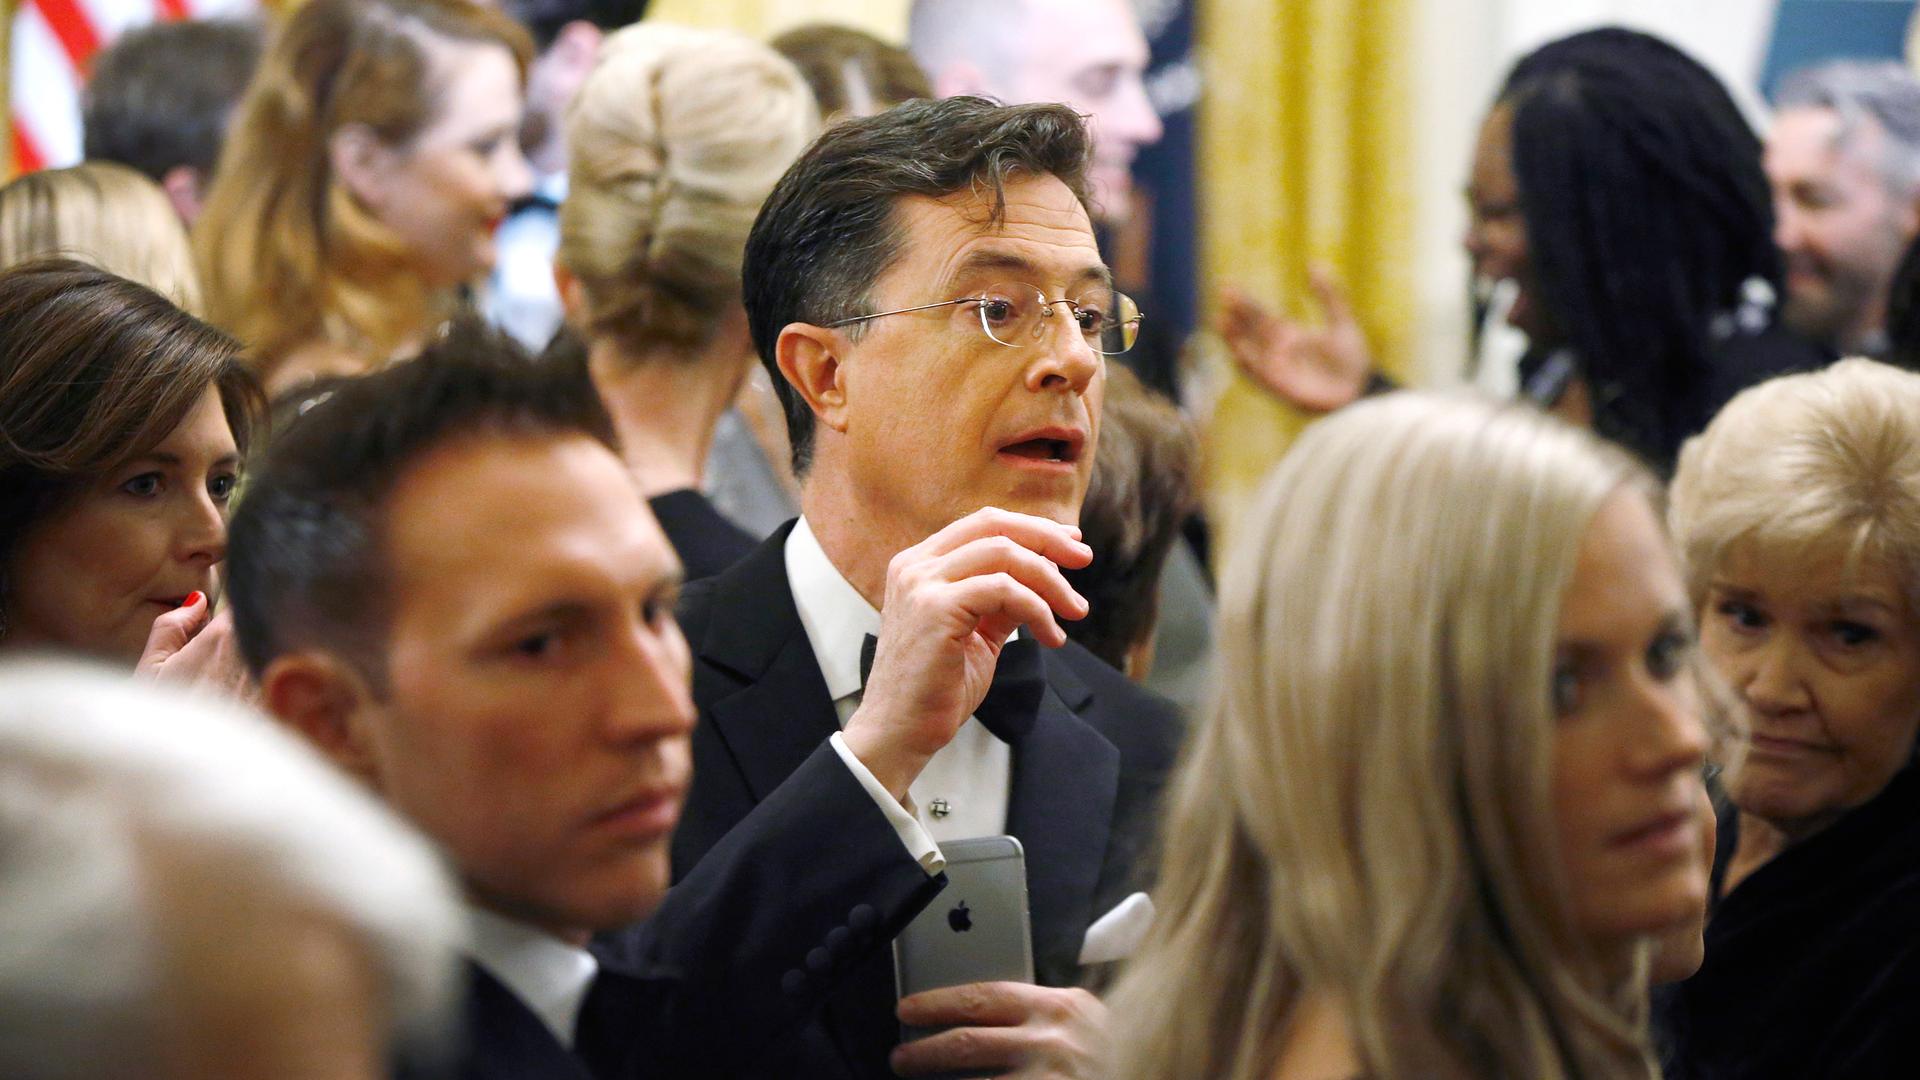 Stephen Colbert's first Late Night show will be on Sept. 8